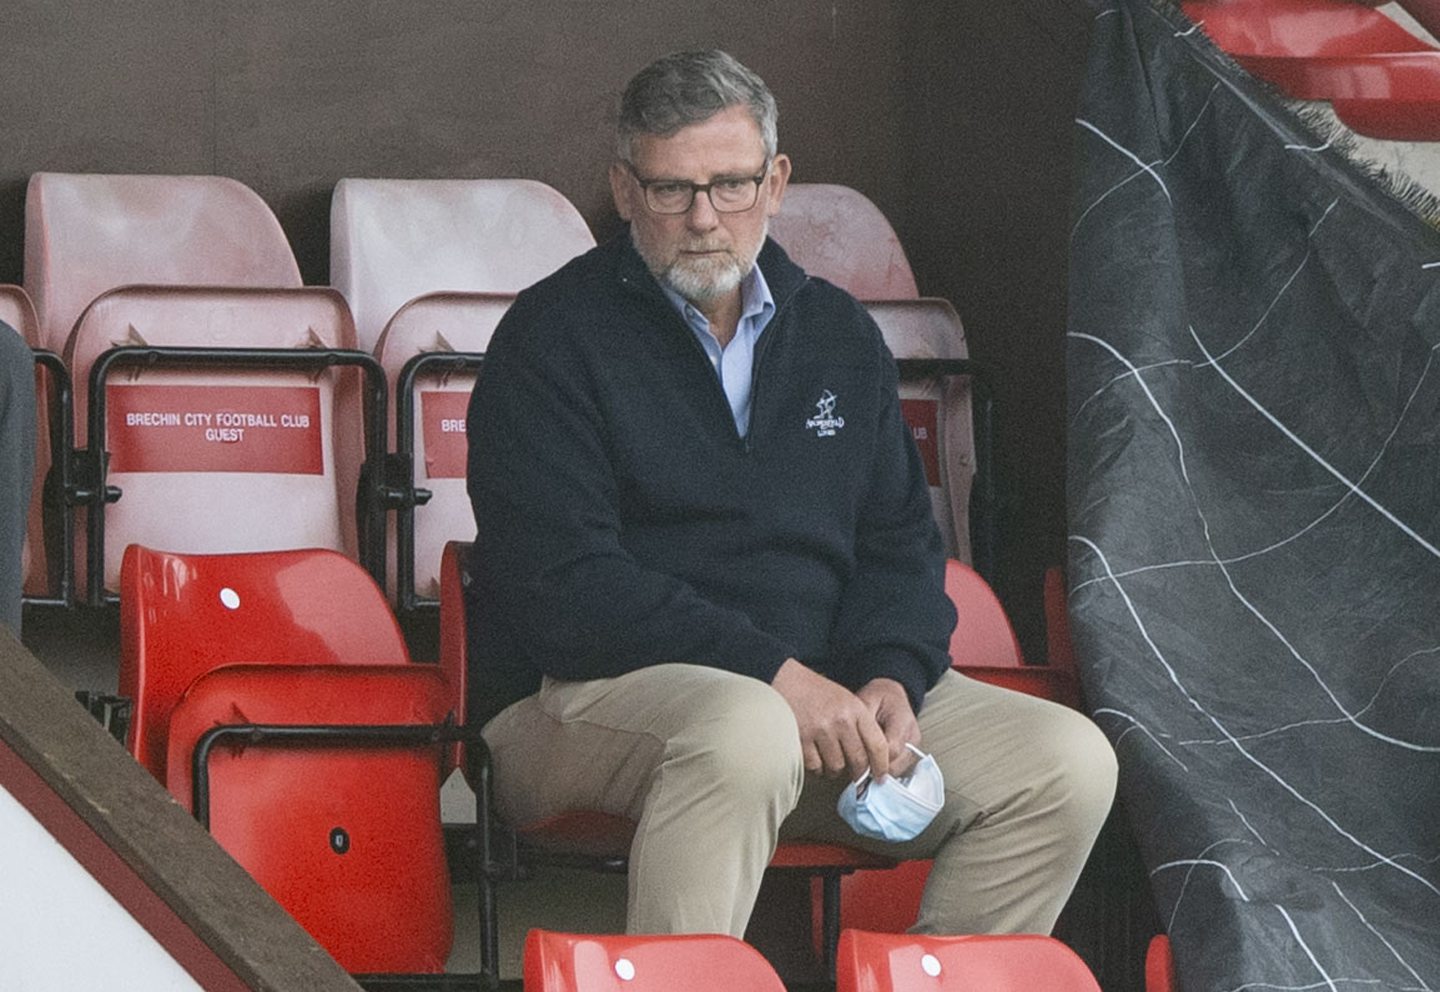 Craig Levein says his job at Brechin would be 'done' if the side won back its place in the SPFL.